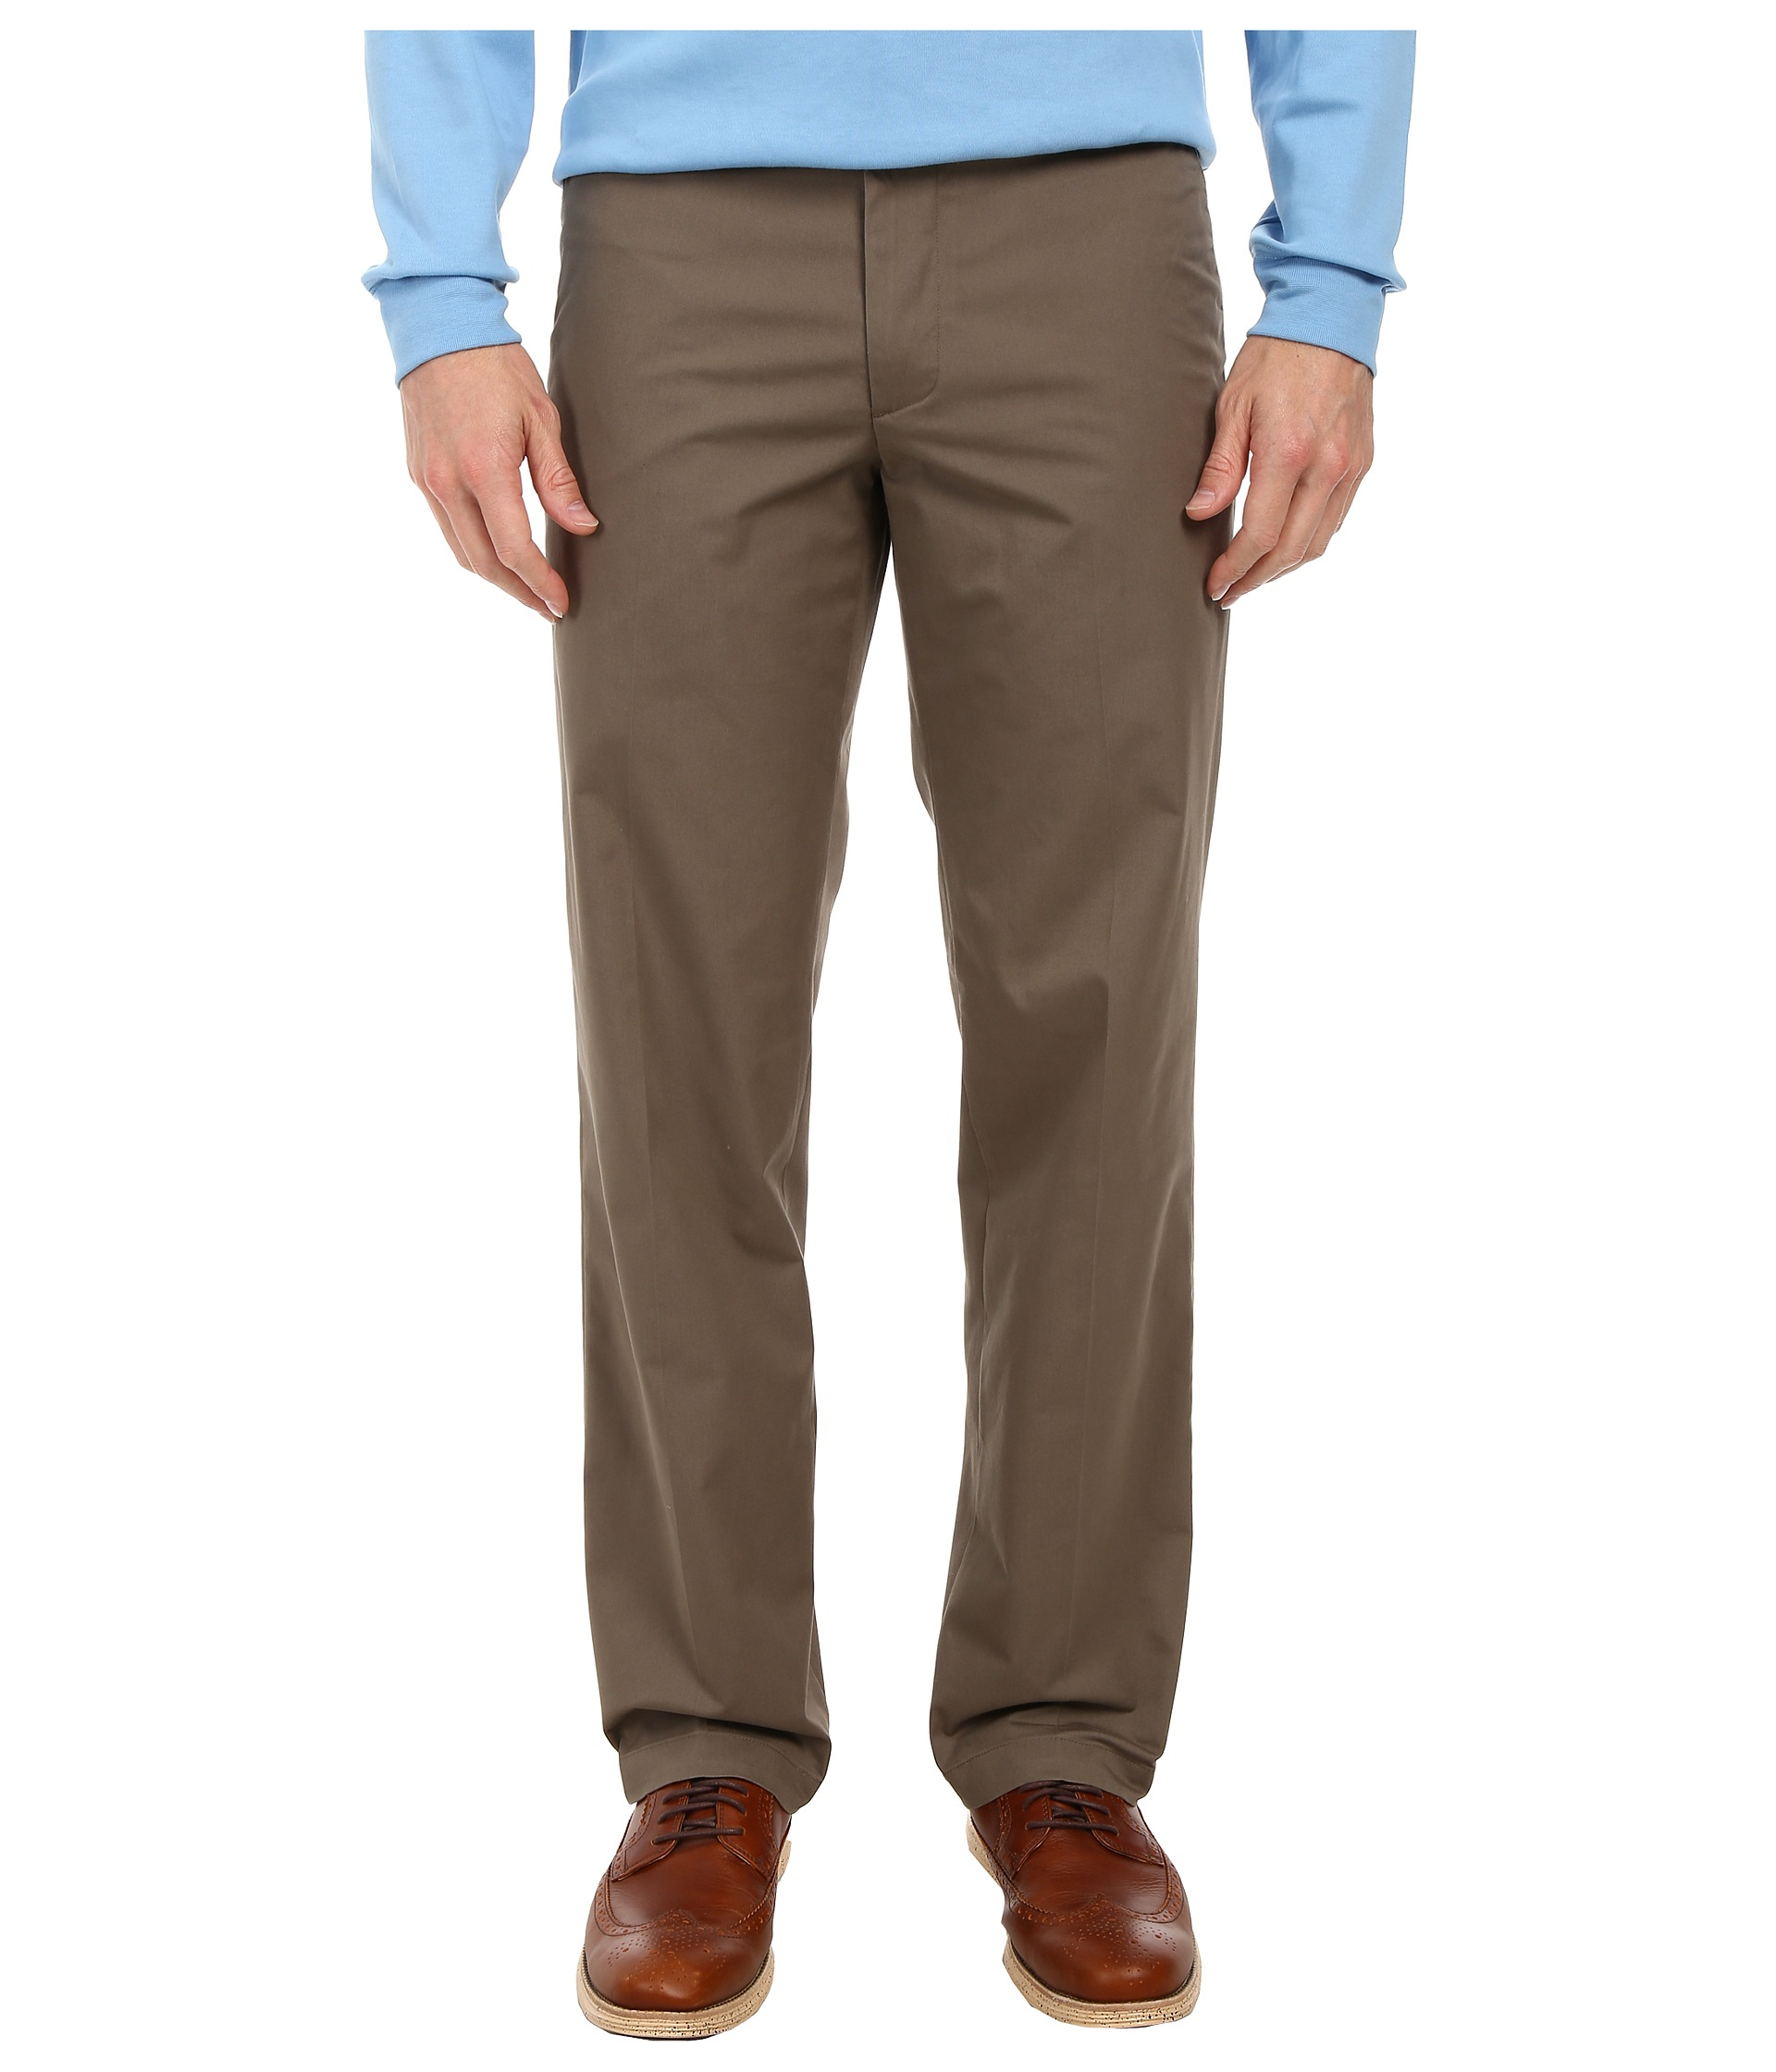 Dockers Signature On The Go Khaki Pants in Brown for Men - Lyst